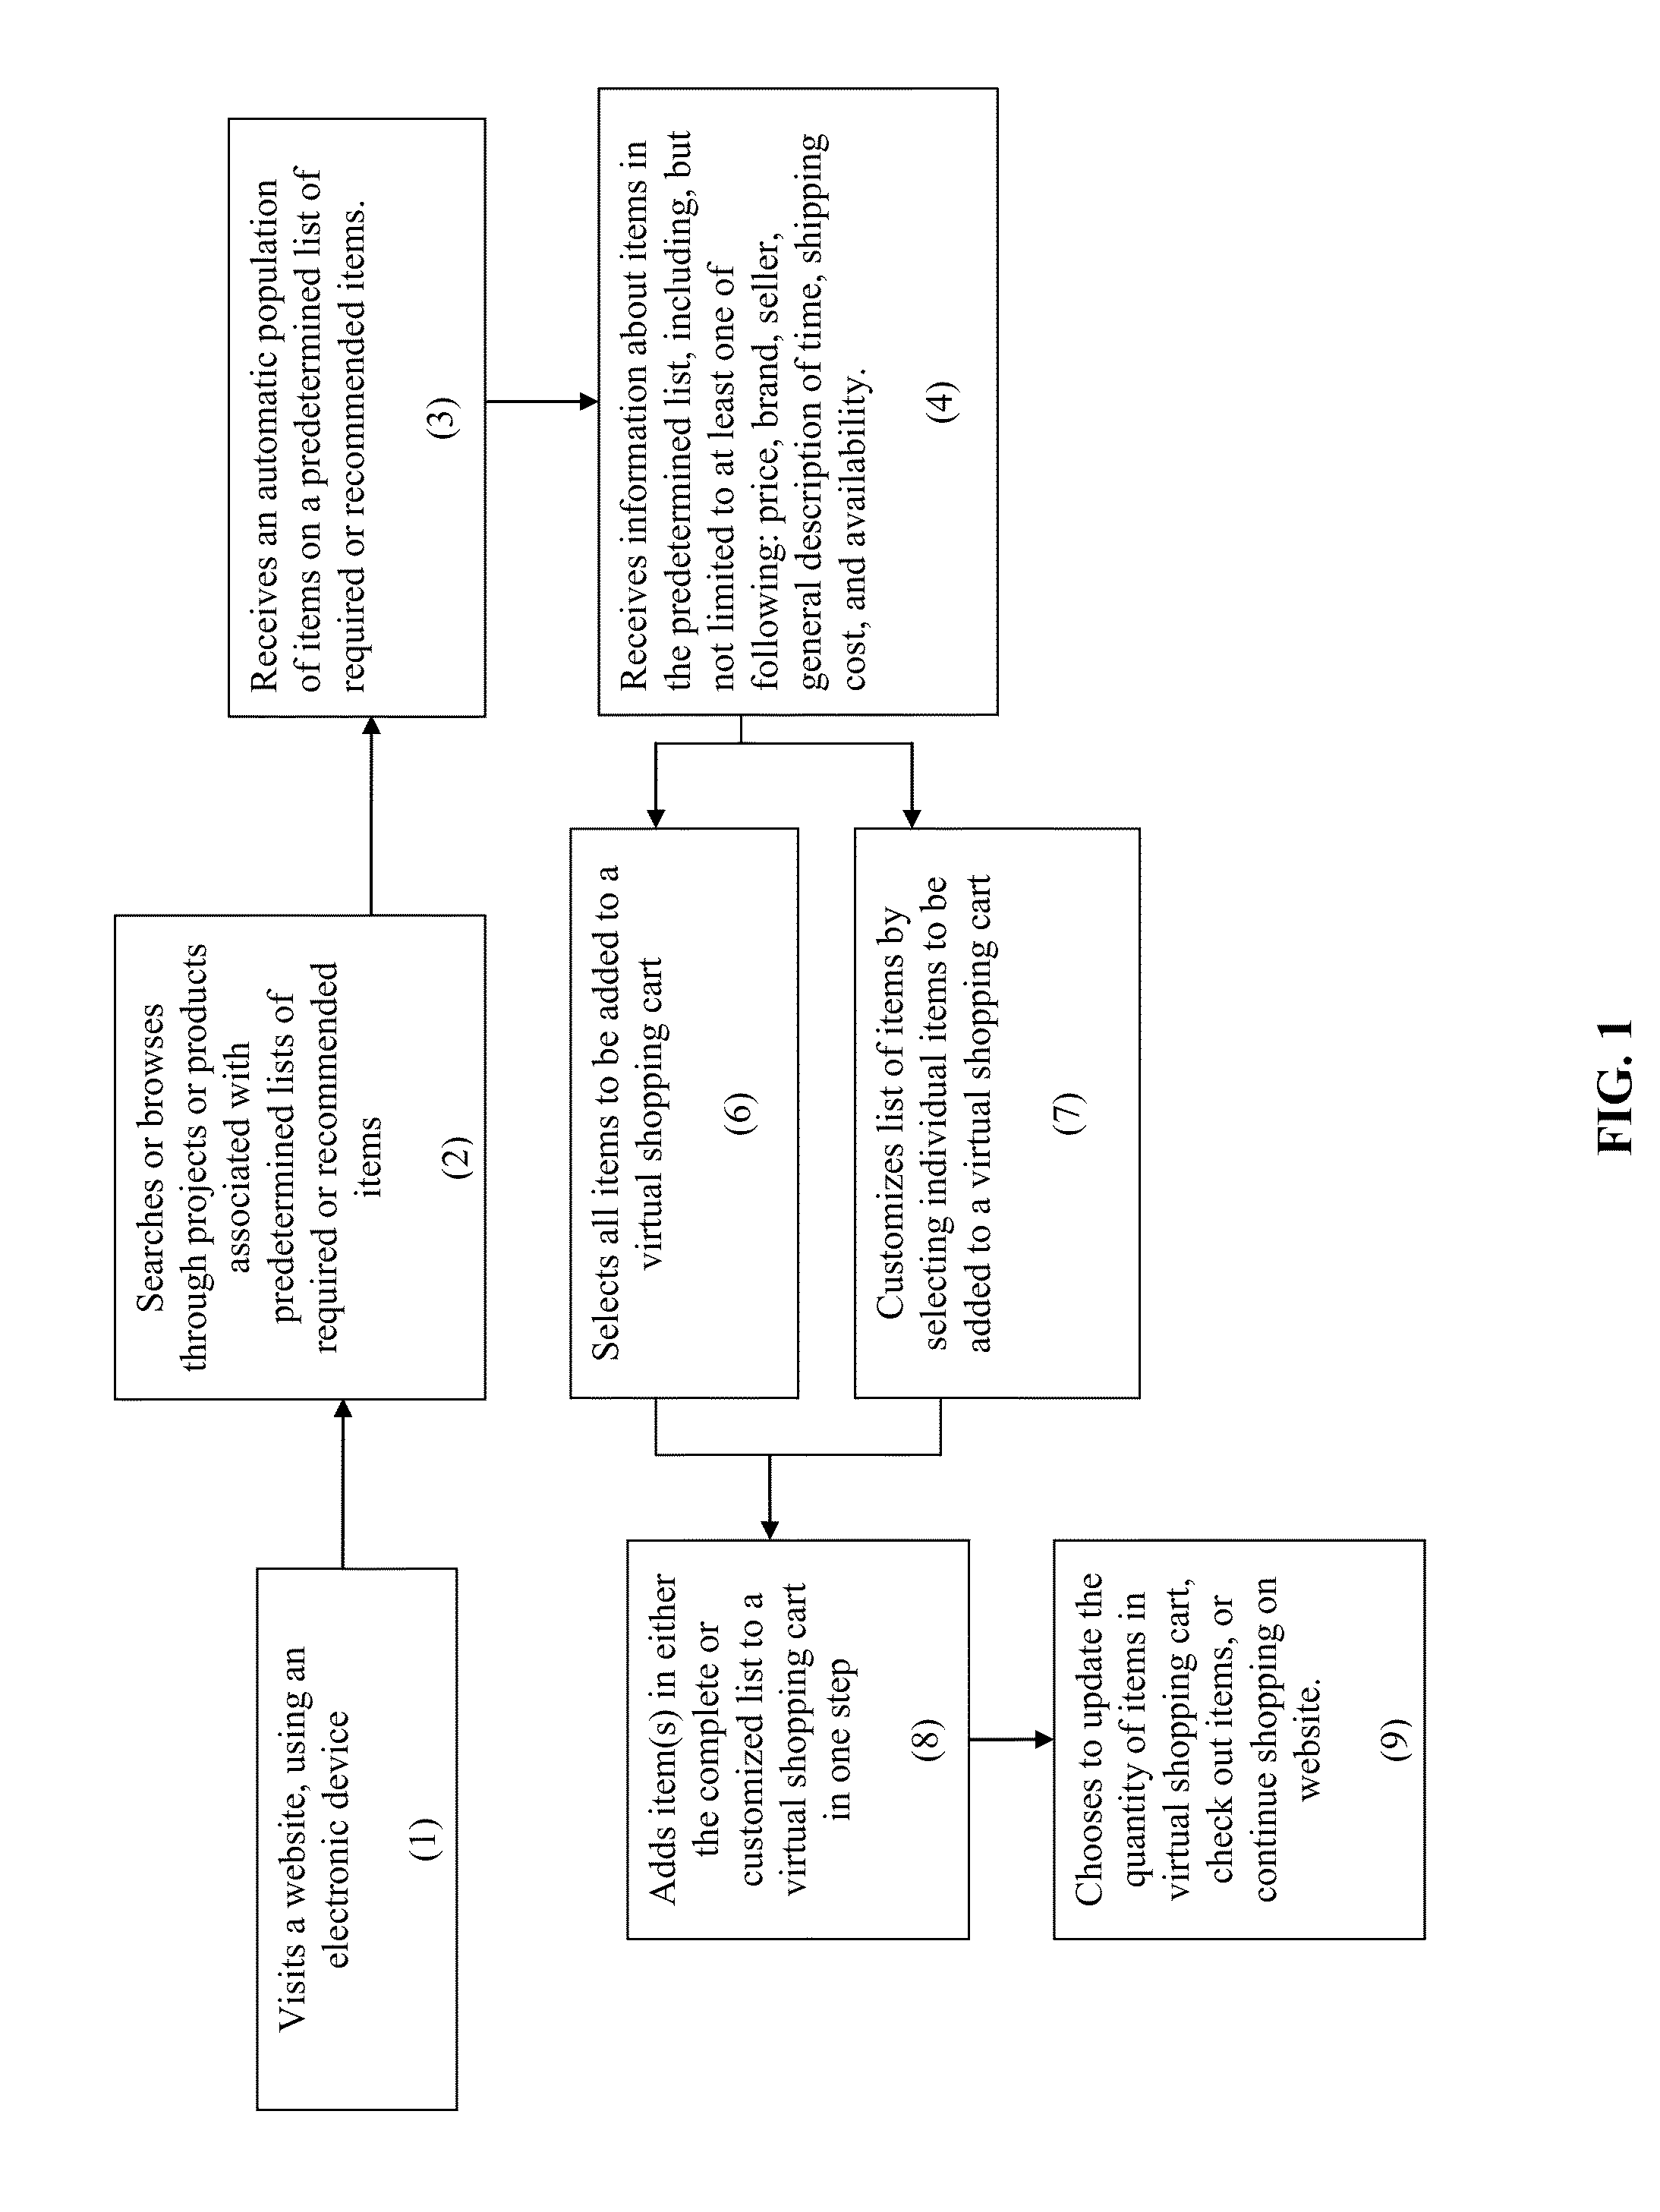 Method for automatically filling a virtual shopping cart with items